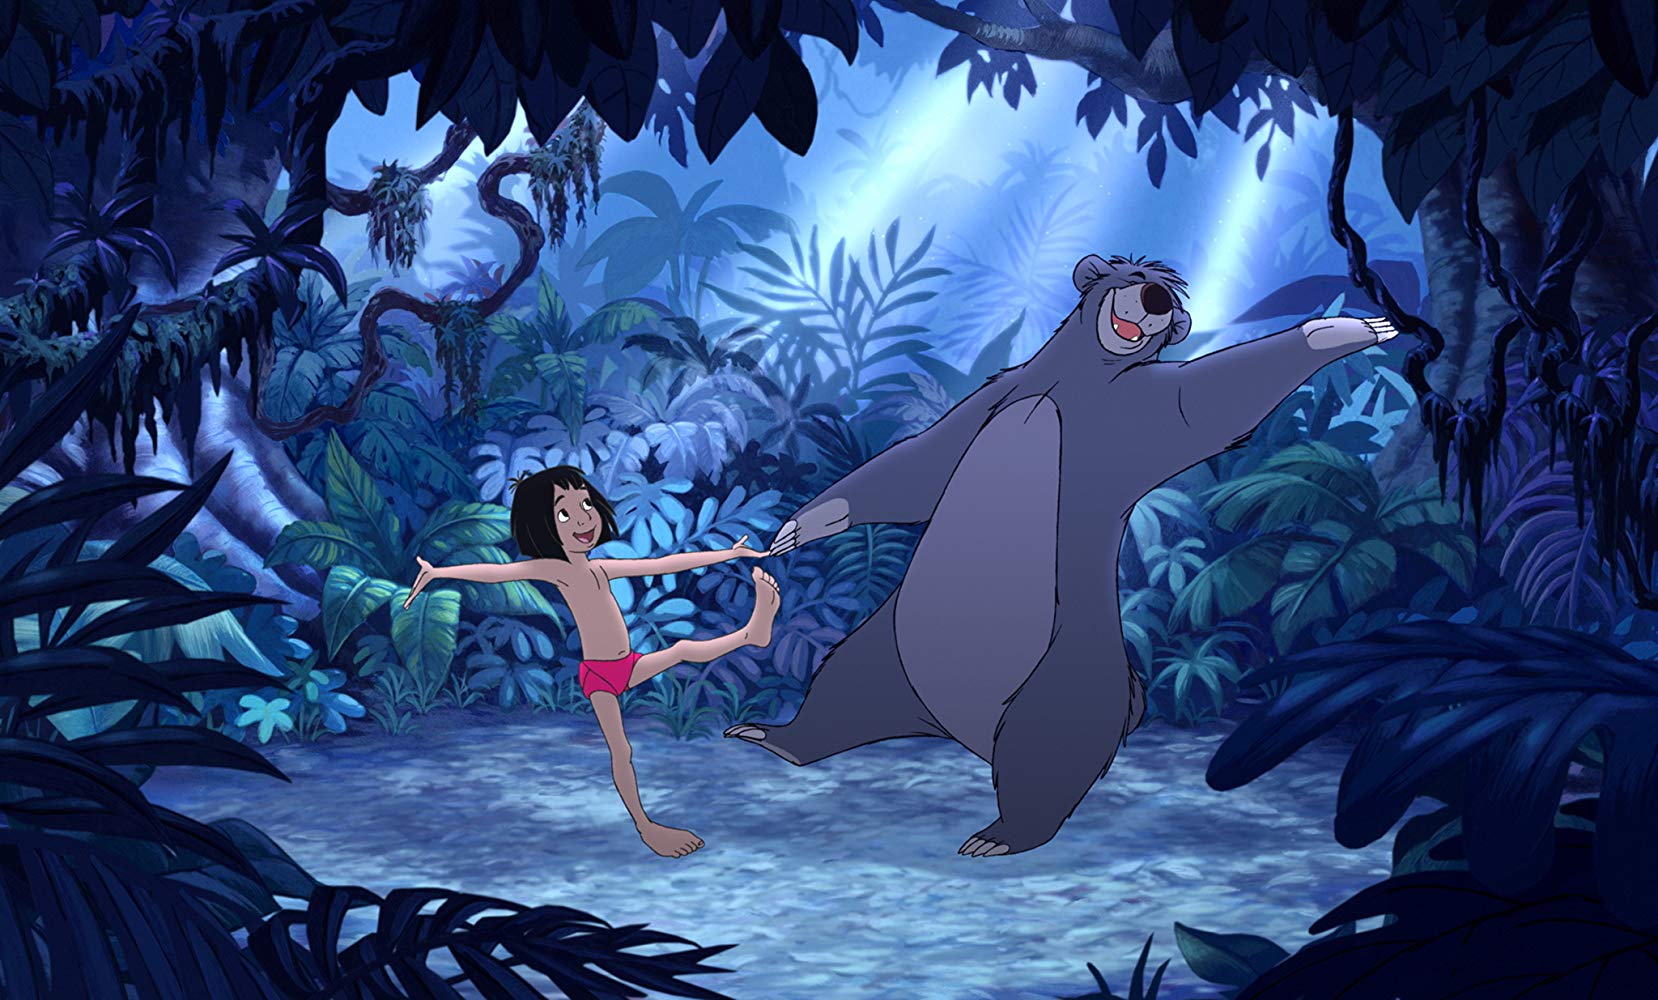 Mowgli (voiced by Haley Joel Osment) and Baloo (voiced by John Goodman) in The Jungle Book 2 (2003)